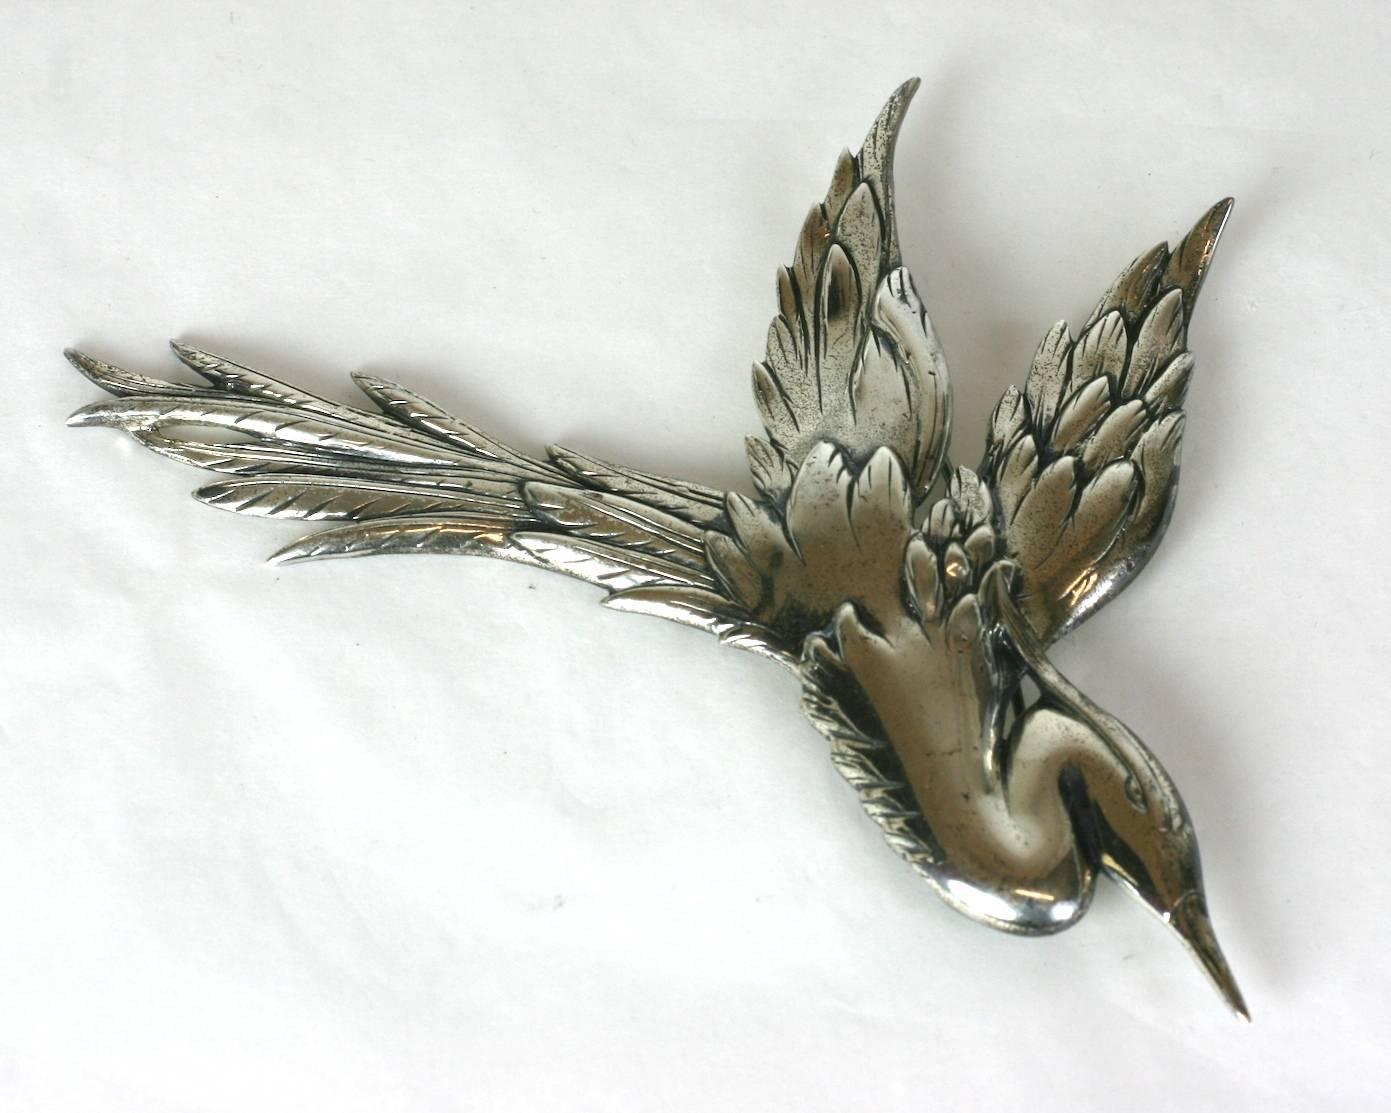 Massive Danecraft Sterling Egret Suite from the 1940's. Large egret shown in flight with fine detailing with matching earrings with screw back fittings. Sterling 1940's. Excellent condition. 

Brooch 4.5" x 4.5". earrings with screw back